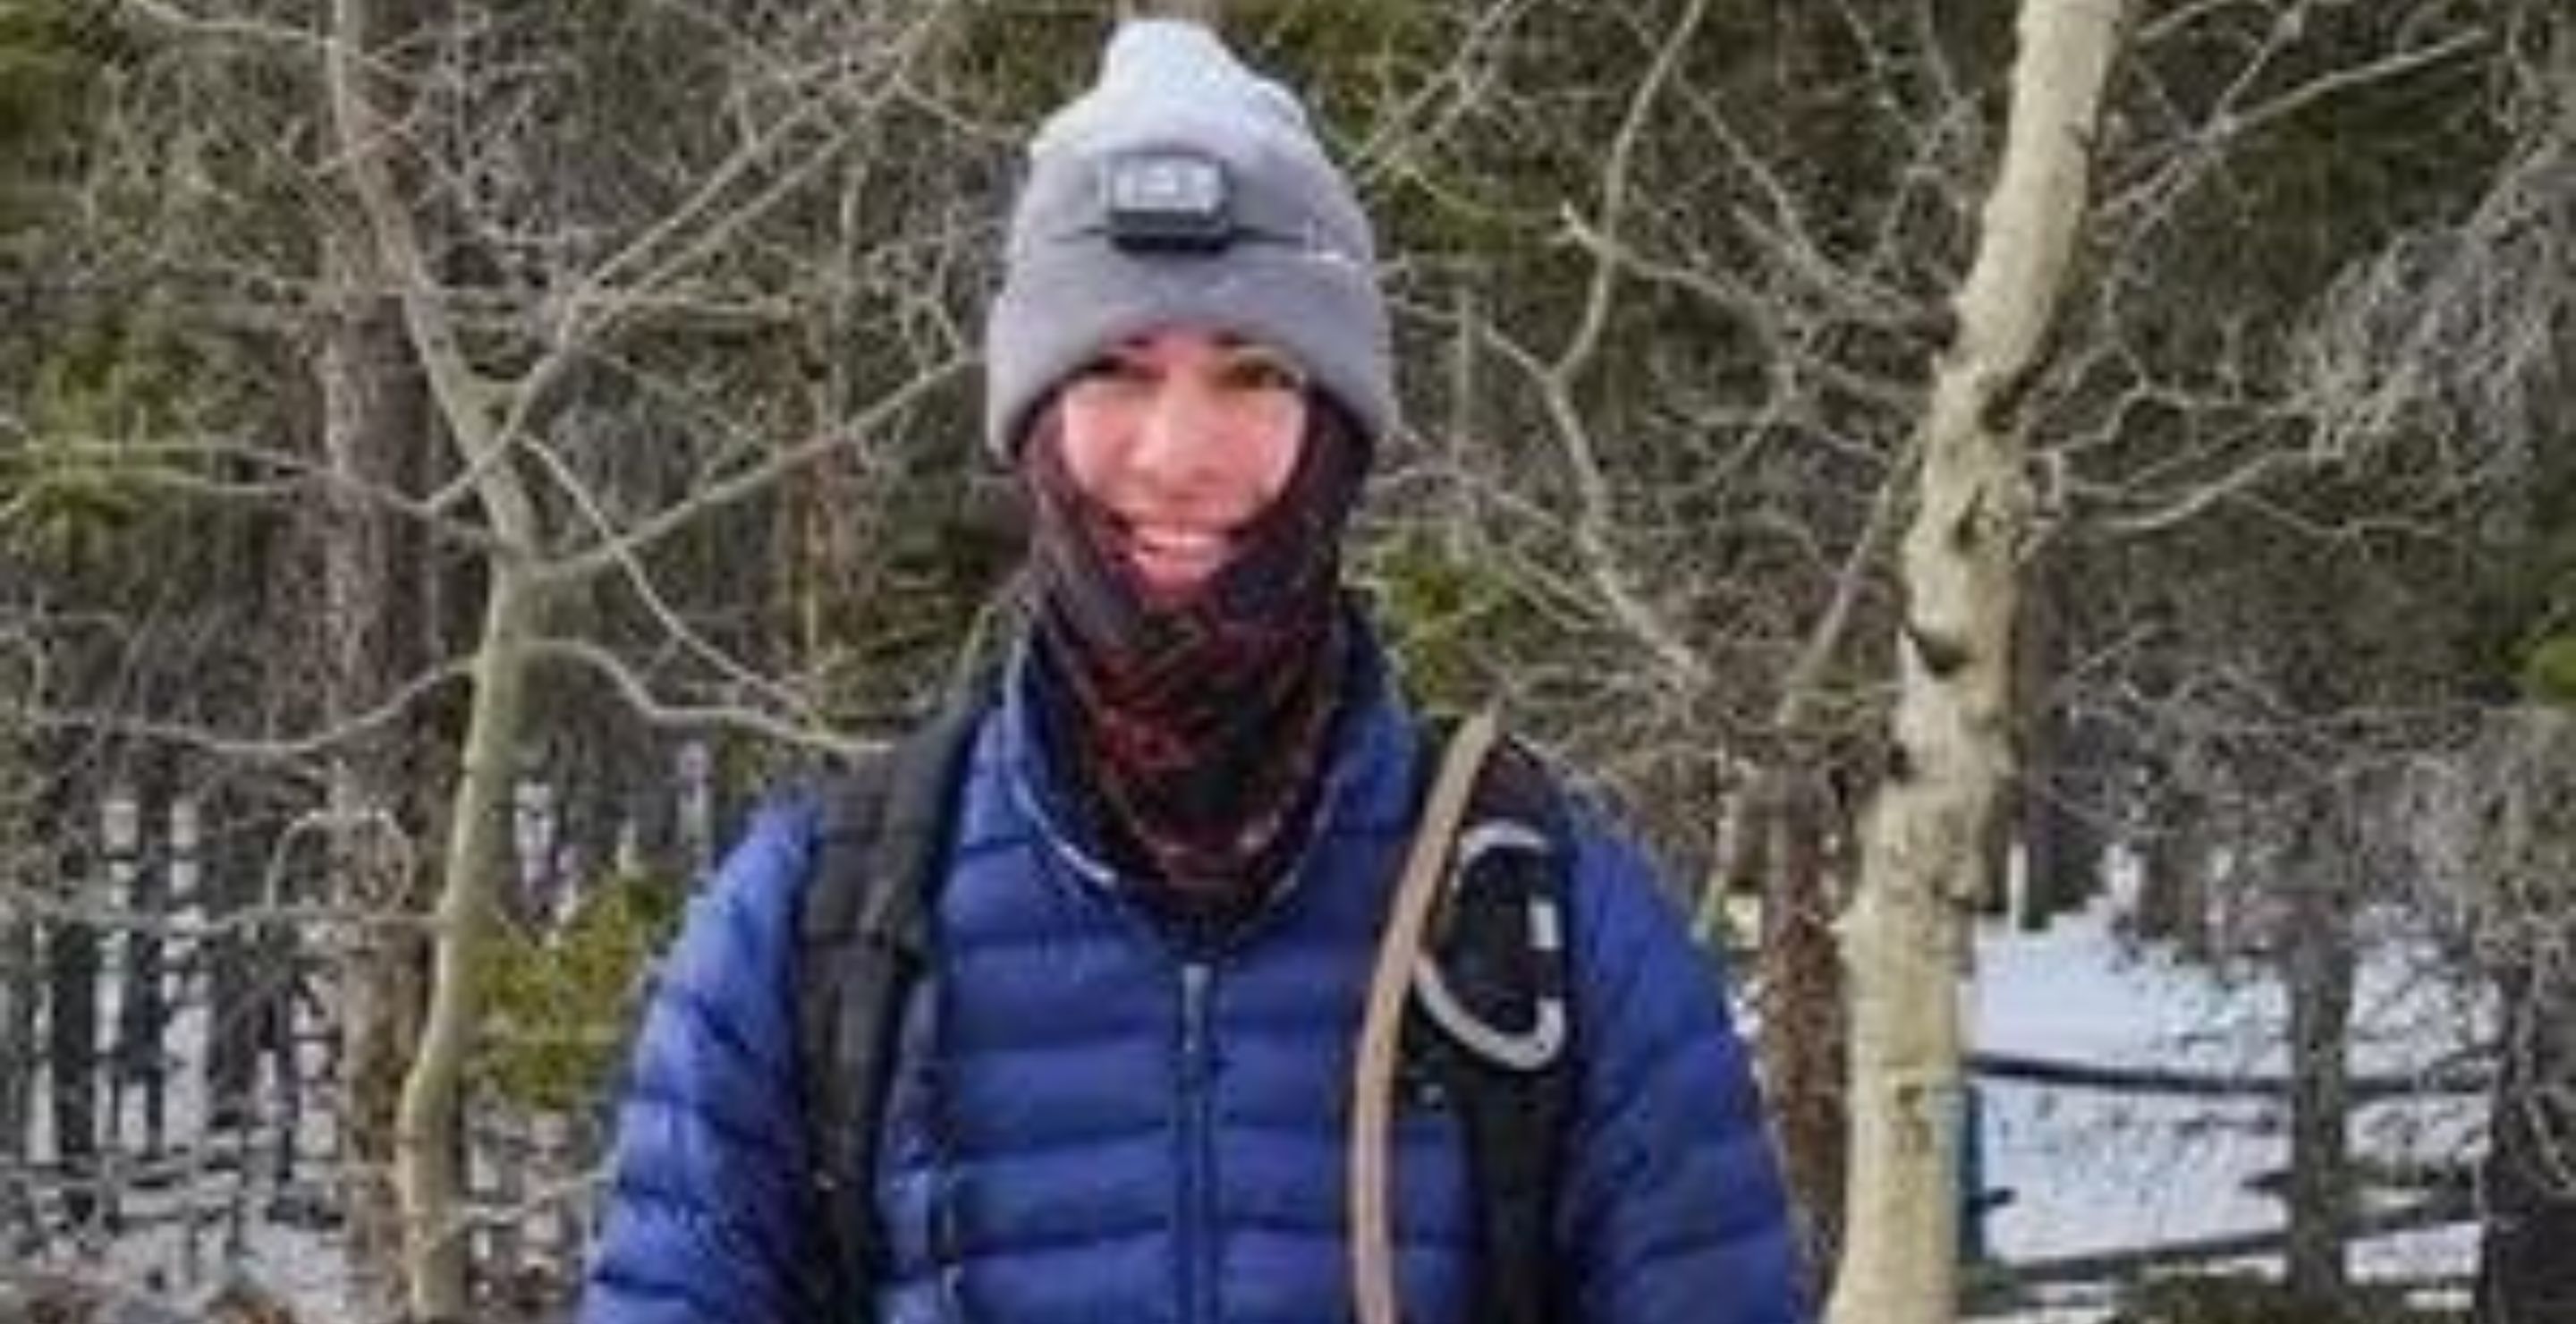 Man Reported Missing While Hiking In Colorado The Search Is Ongoing